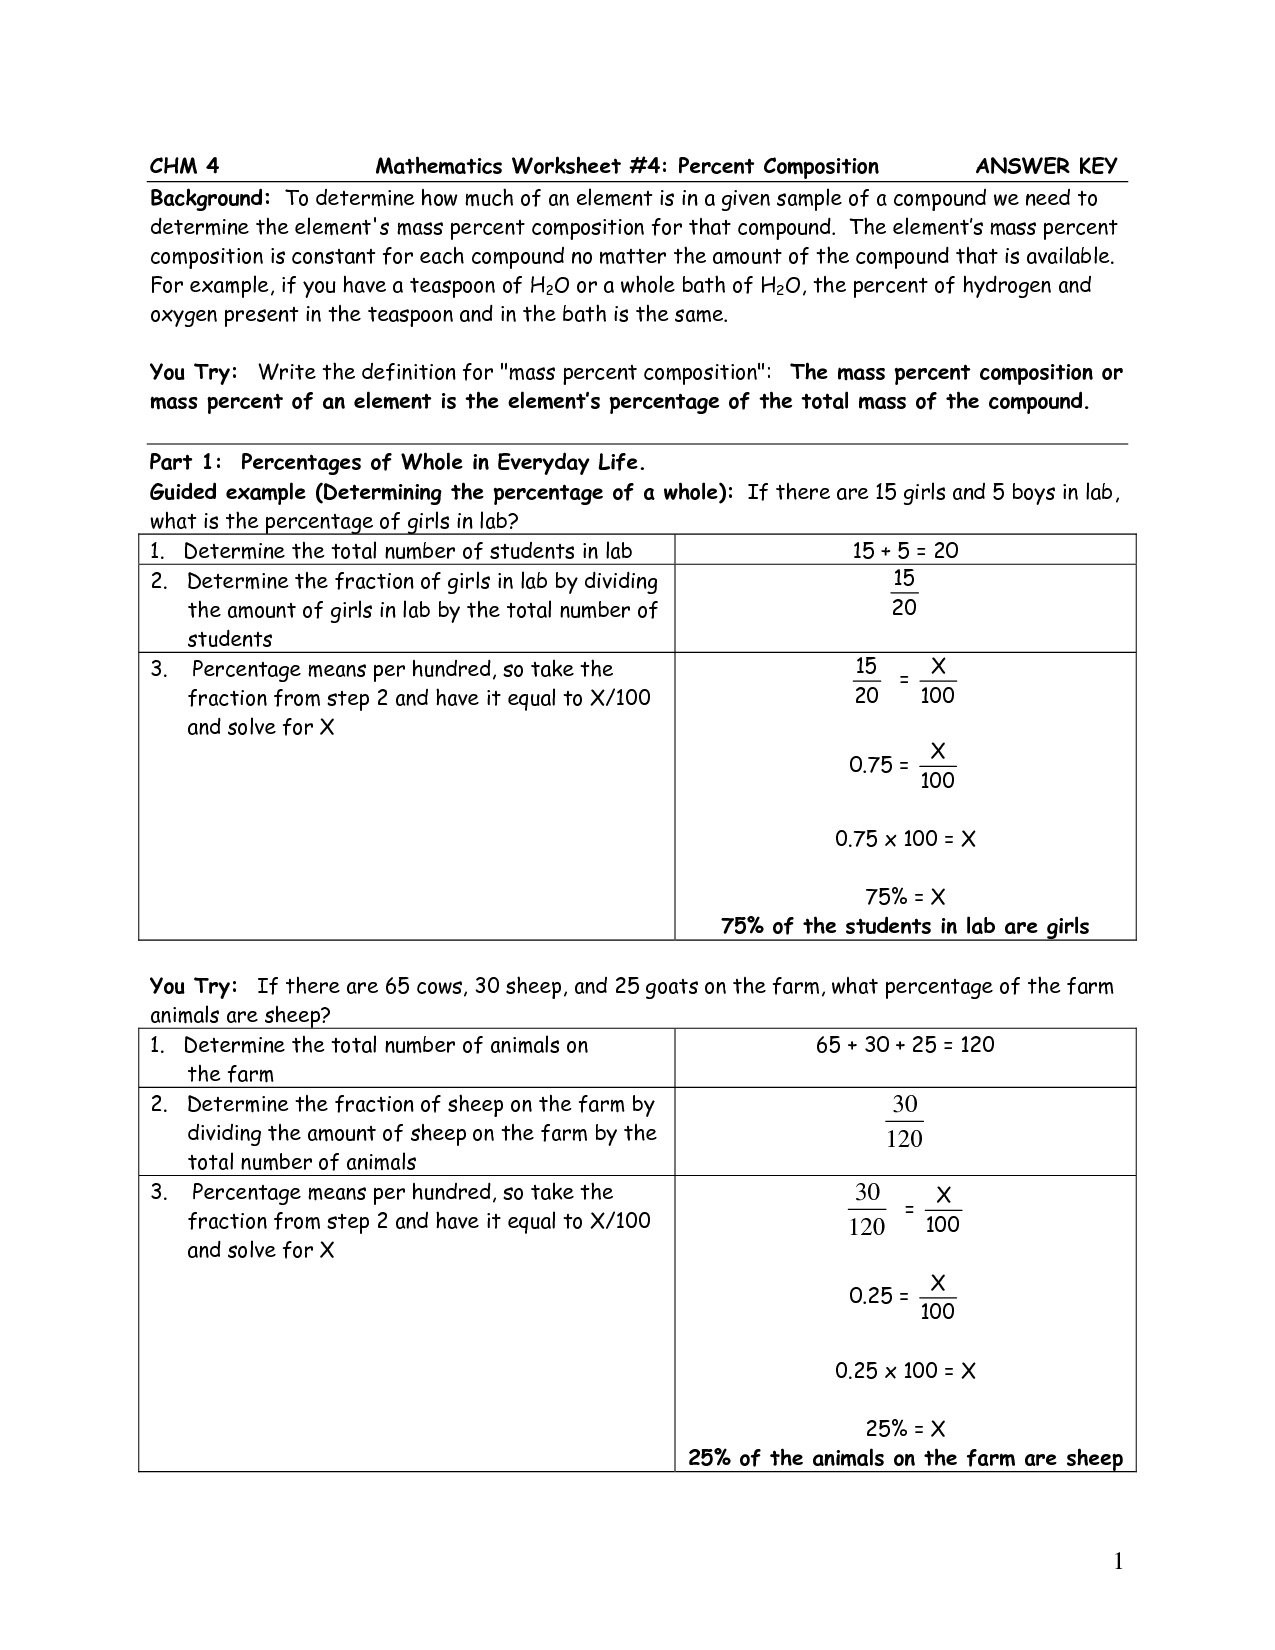 16 Best Images of Computer History Questions And Answers Worksheet  Computer Basics Worksheet 